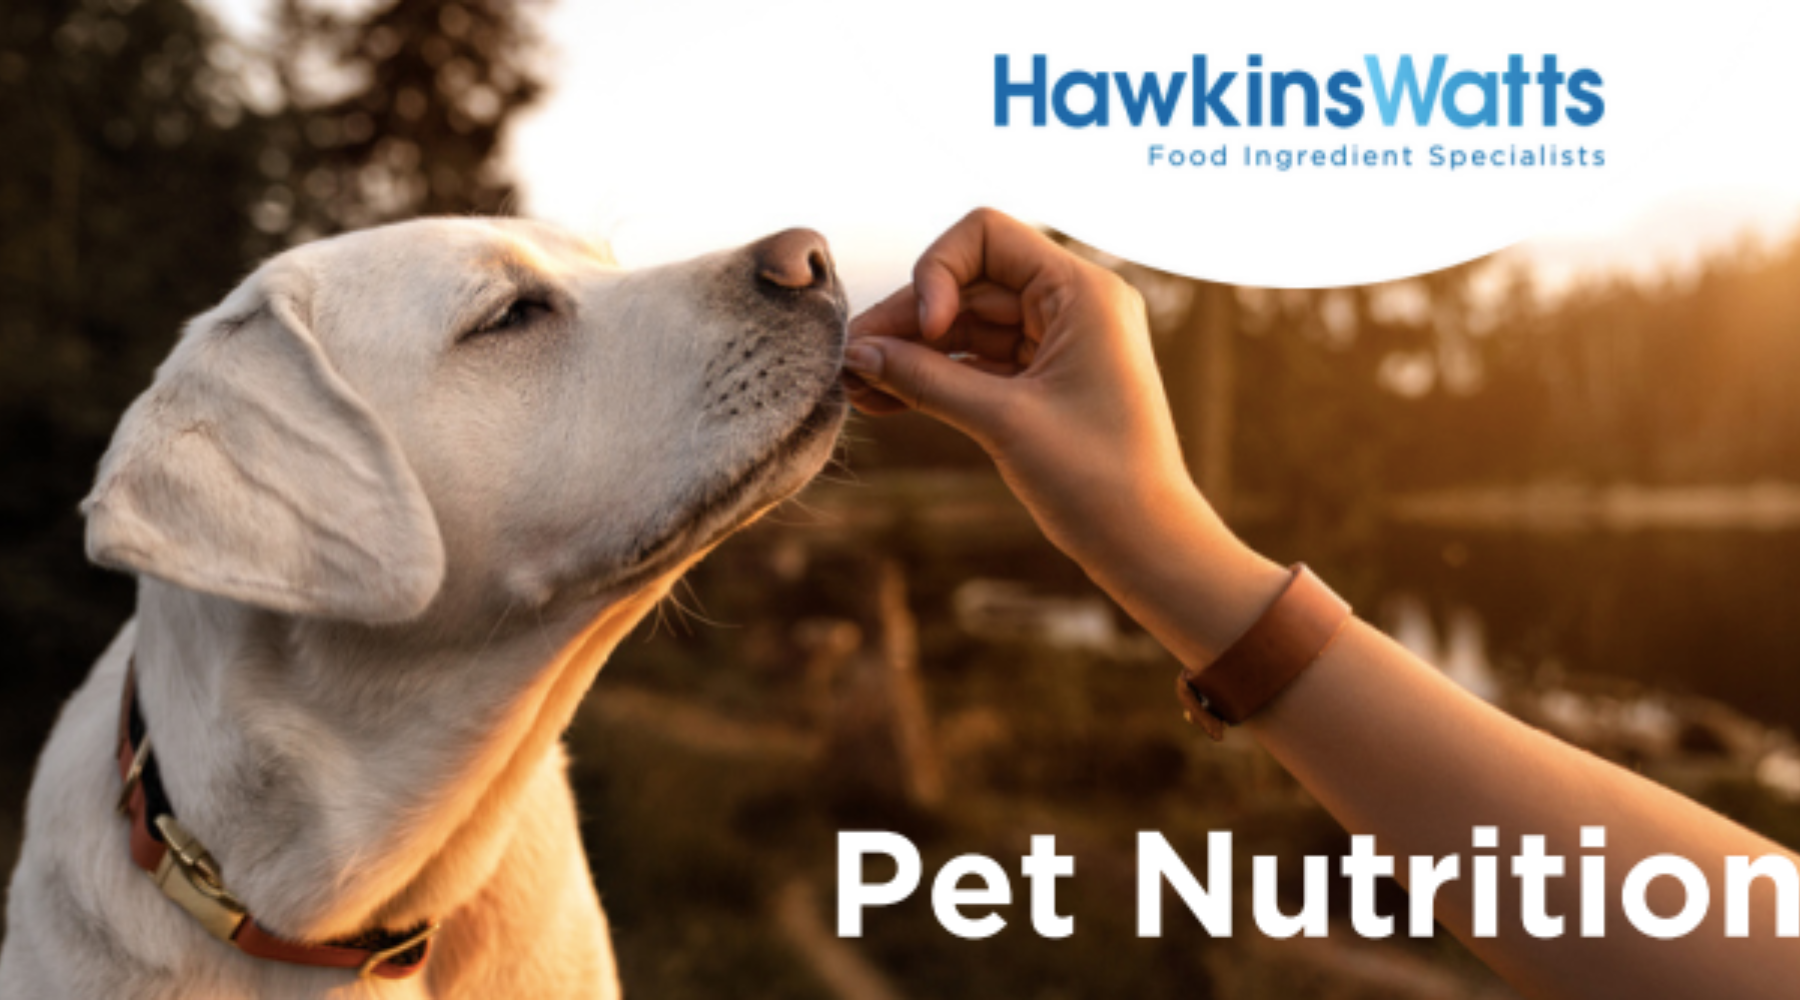 Pet Nutrition is Constantly Evolving